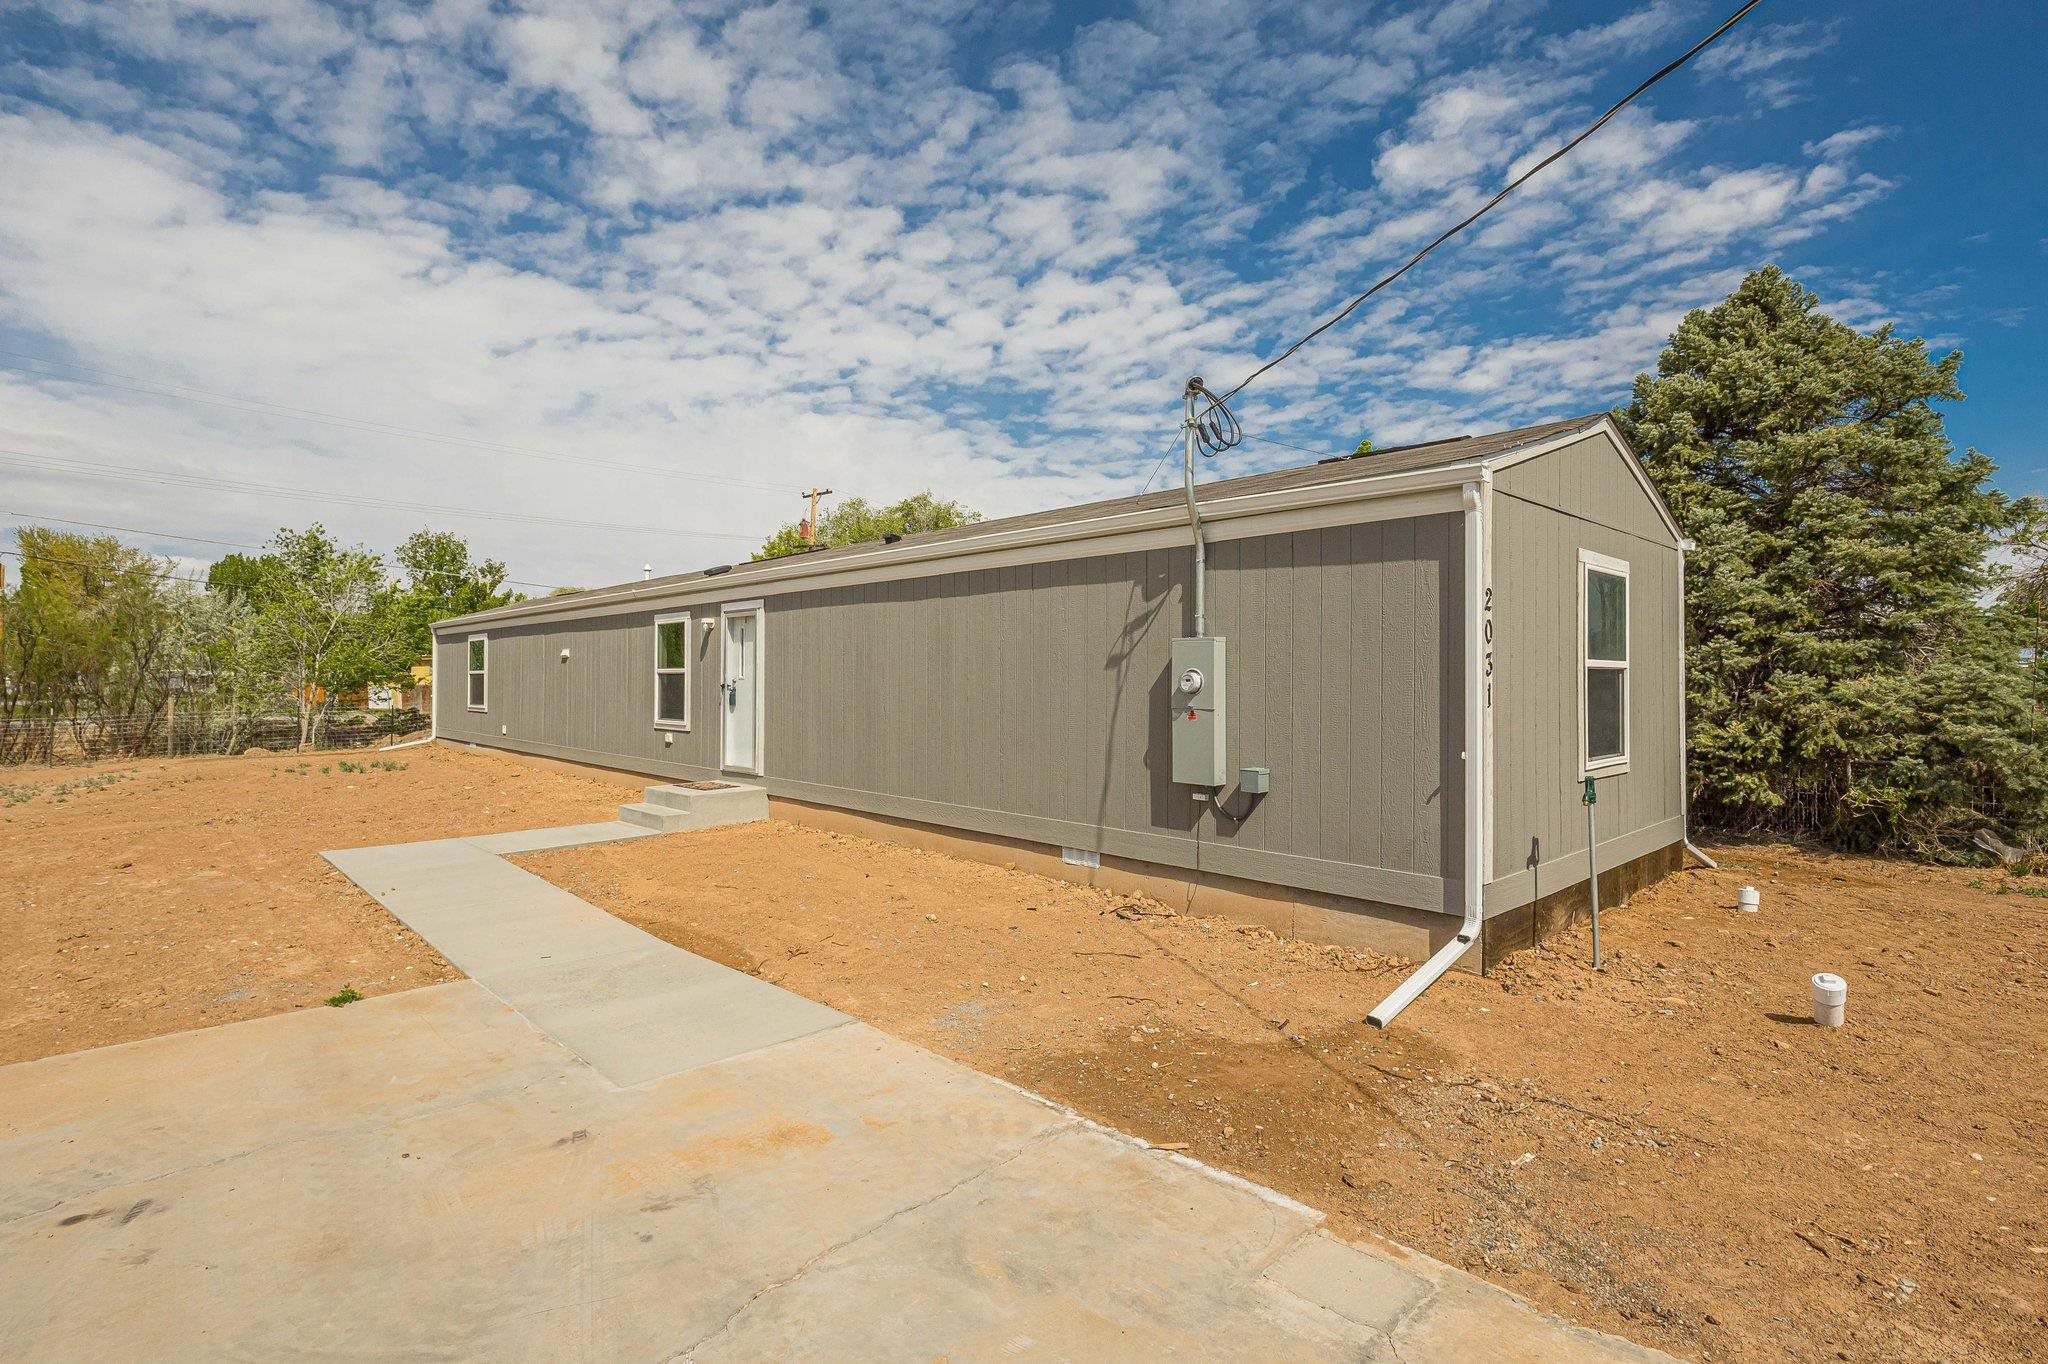 Country feel, city close in this brand new manufactured home on Orchard Mesa.  This 3-bedroom, 2 bath home features a split bedroom design. 2 full bathrooms and an open kitchen with plenty of cabinet and counter space.  The primary suite includes a full bath and a walk-in closet. The secondary bedrooms share another full bath. This is a zero energy home with upgraded insulation and a fresh air circulation system.  The hot water heater even has blue tooth capability. Outside, you will enjoy the rural feel of the property and there is plenty of RV parking a storage shed for additional storage and NO HOA. For your convenience, the seller has thoughtfully installed RV dump, hookup and 50 amp plug.  The landscaping is a blank slate and ready for your design.  Irrigation water is paid through taxes.  Call for your private showing today.